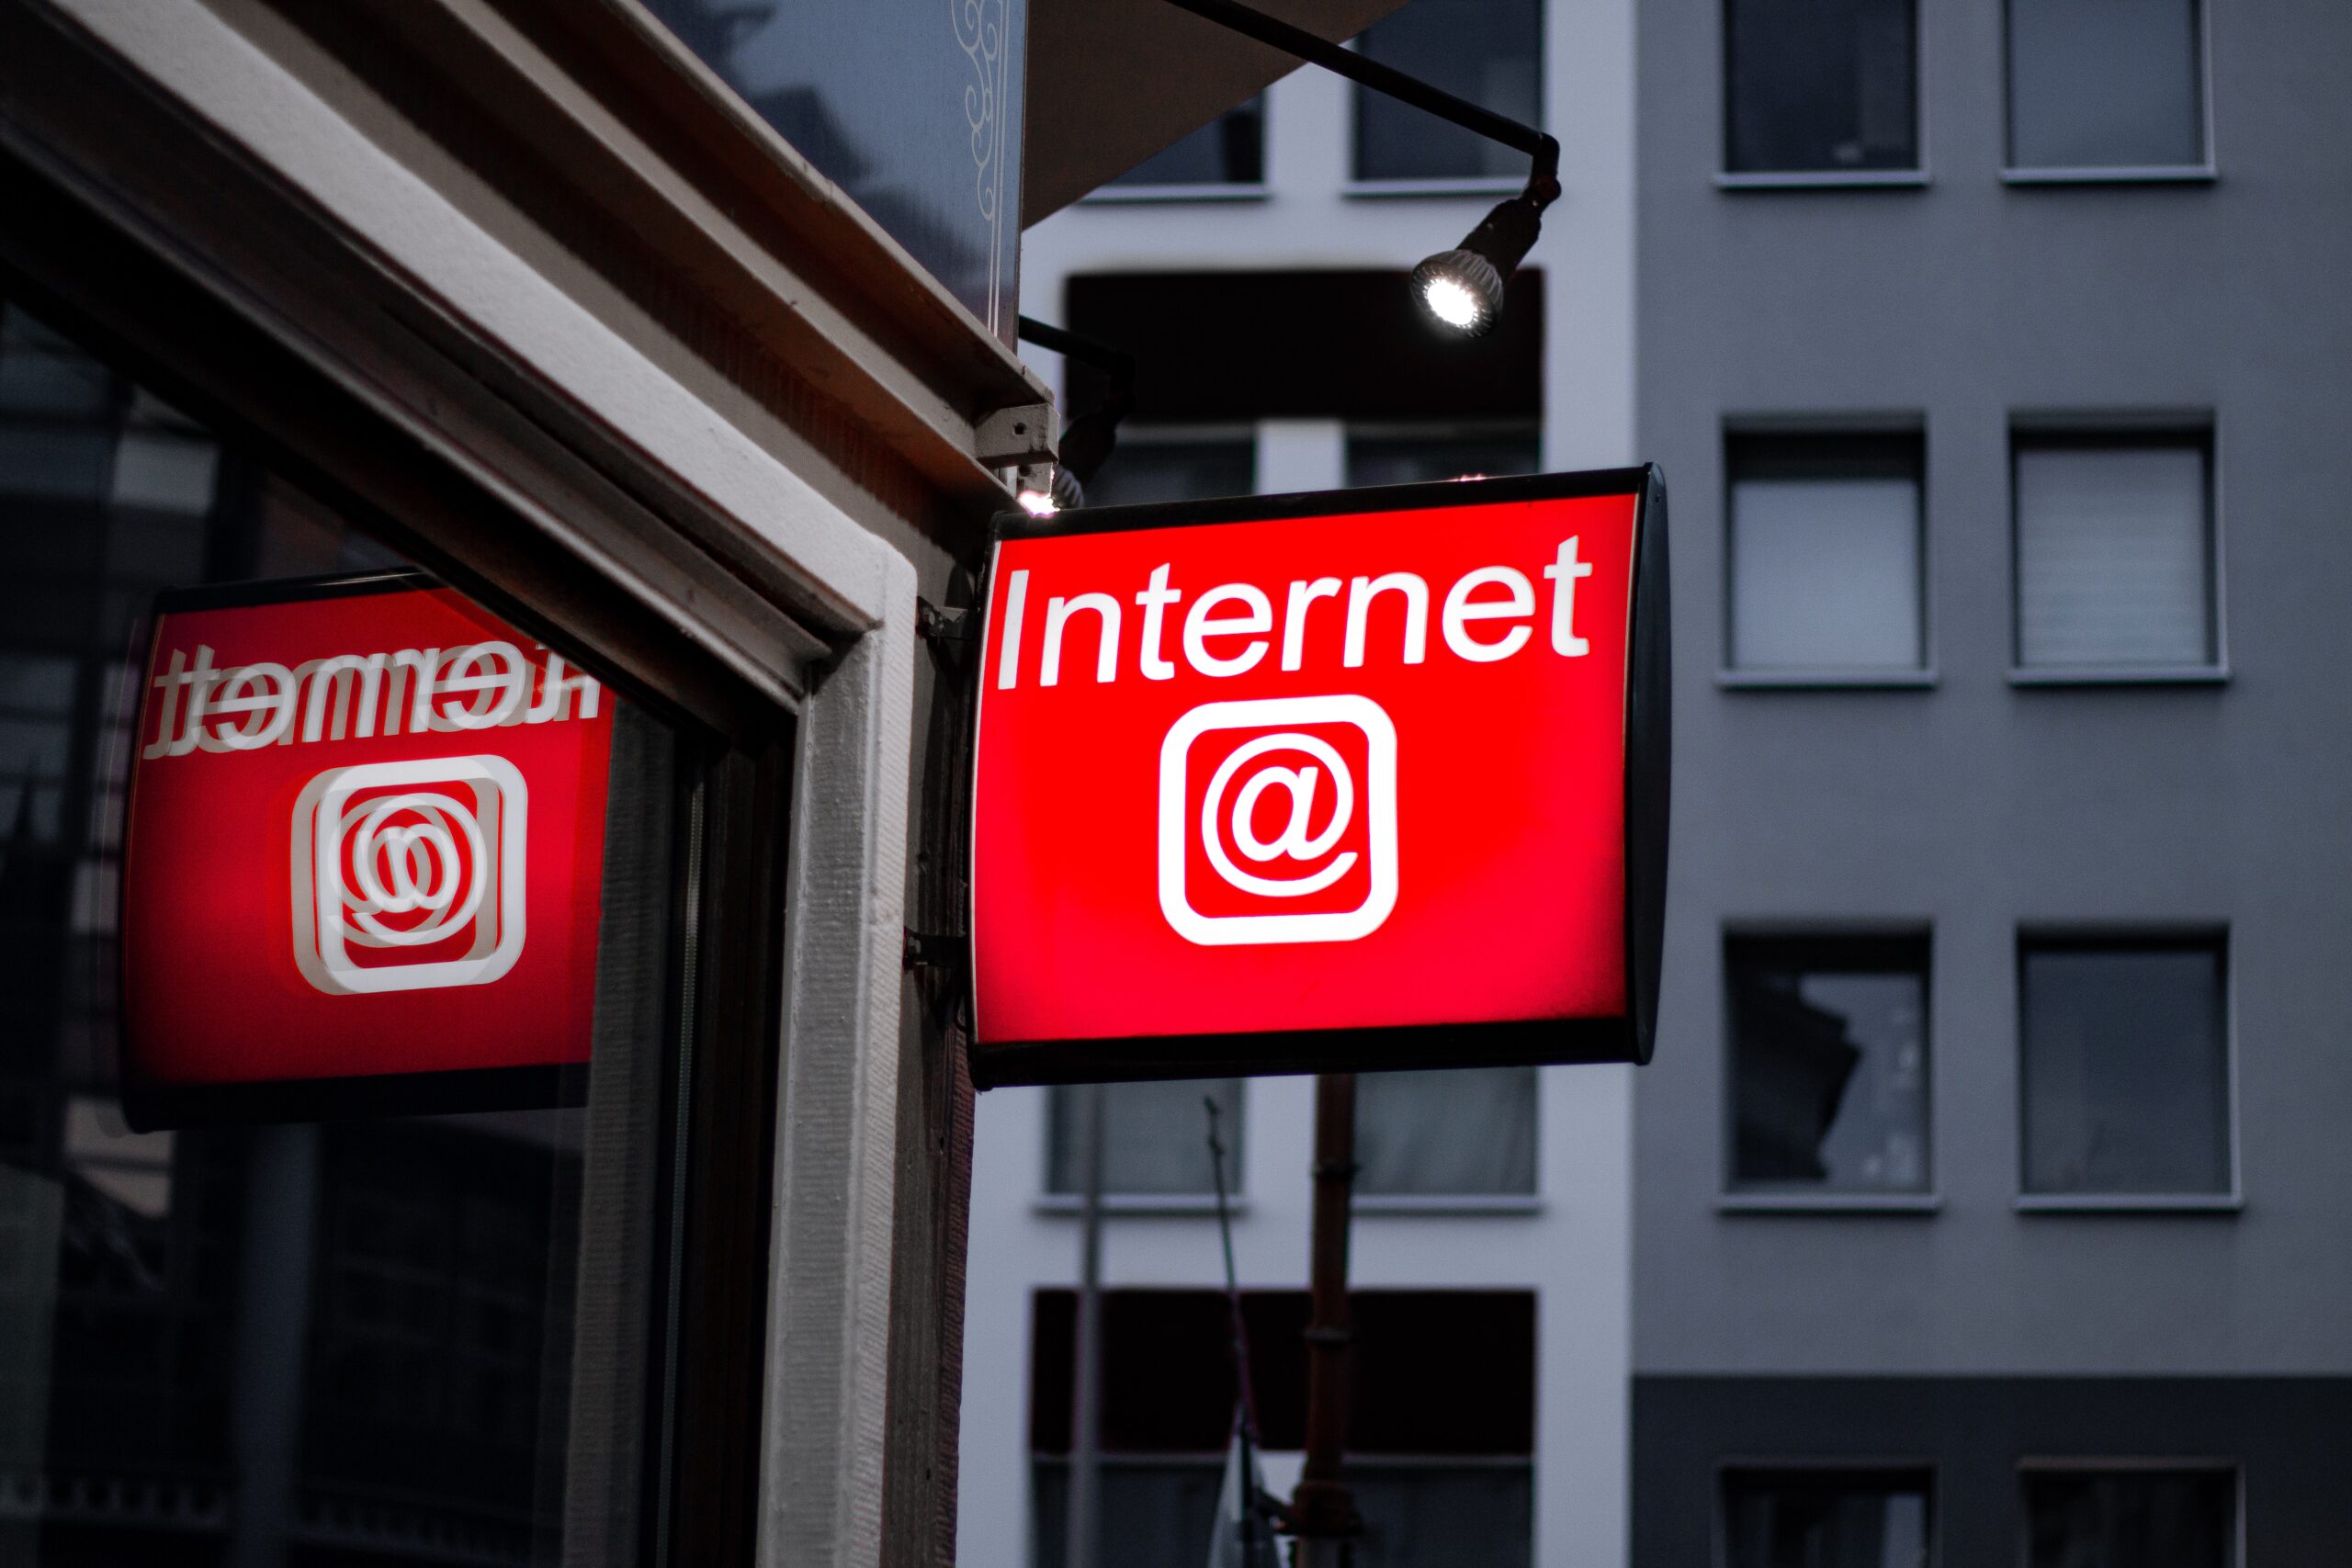 A red neon sign for internet